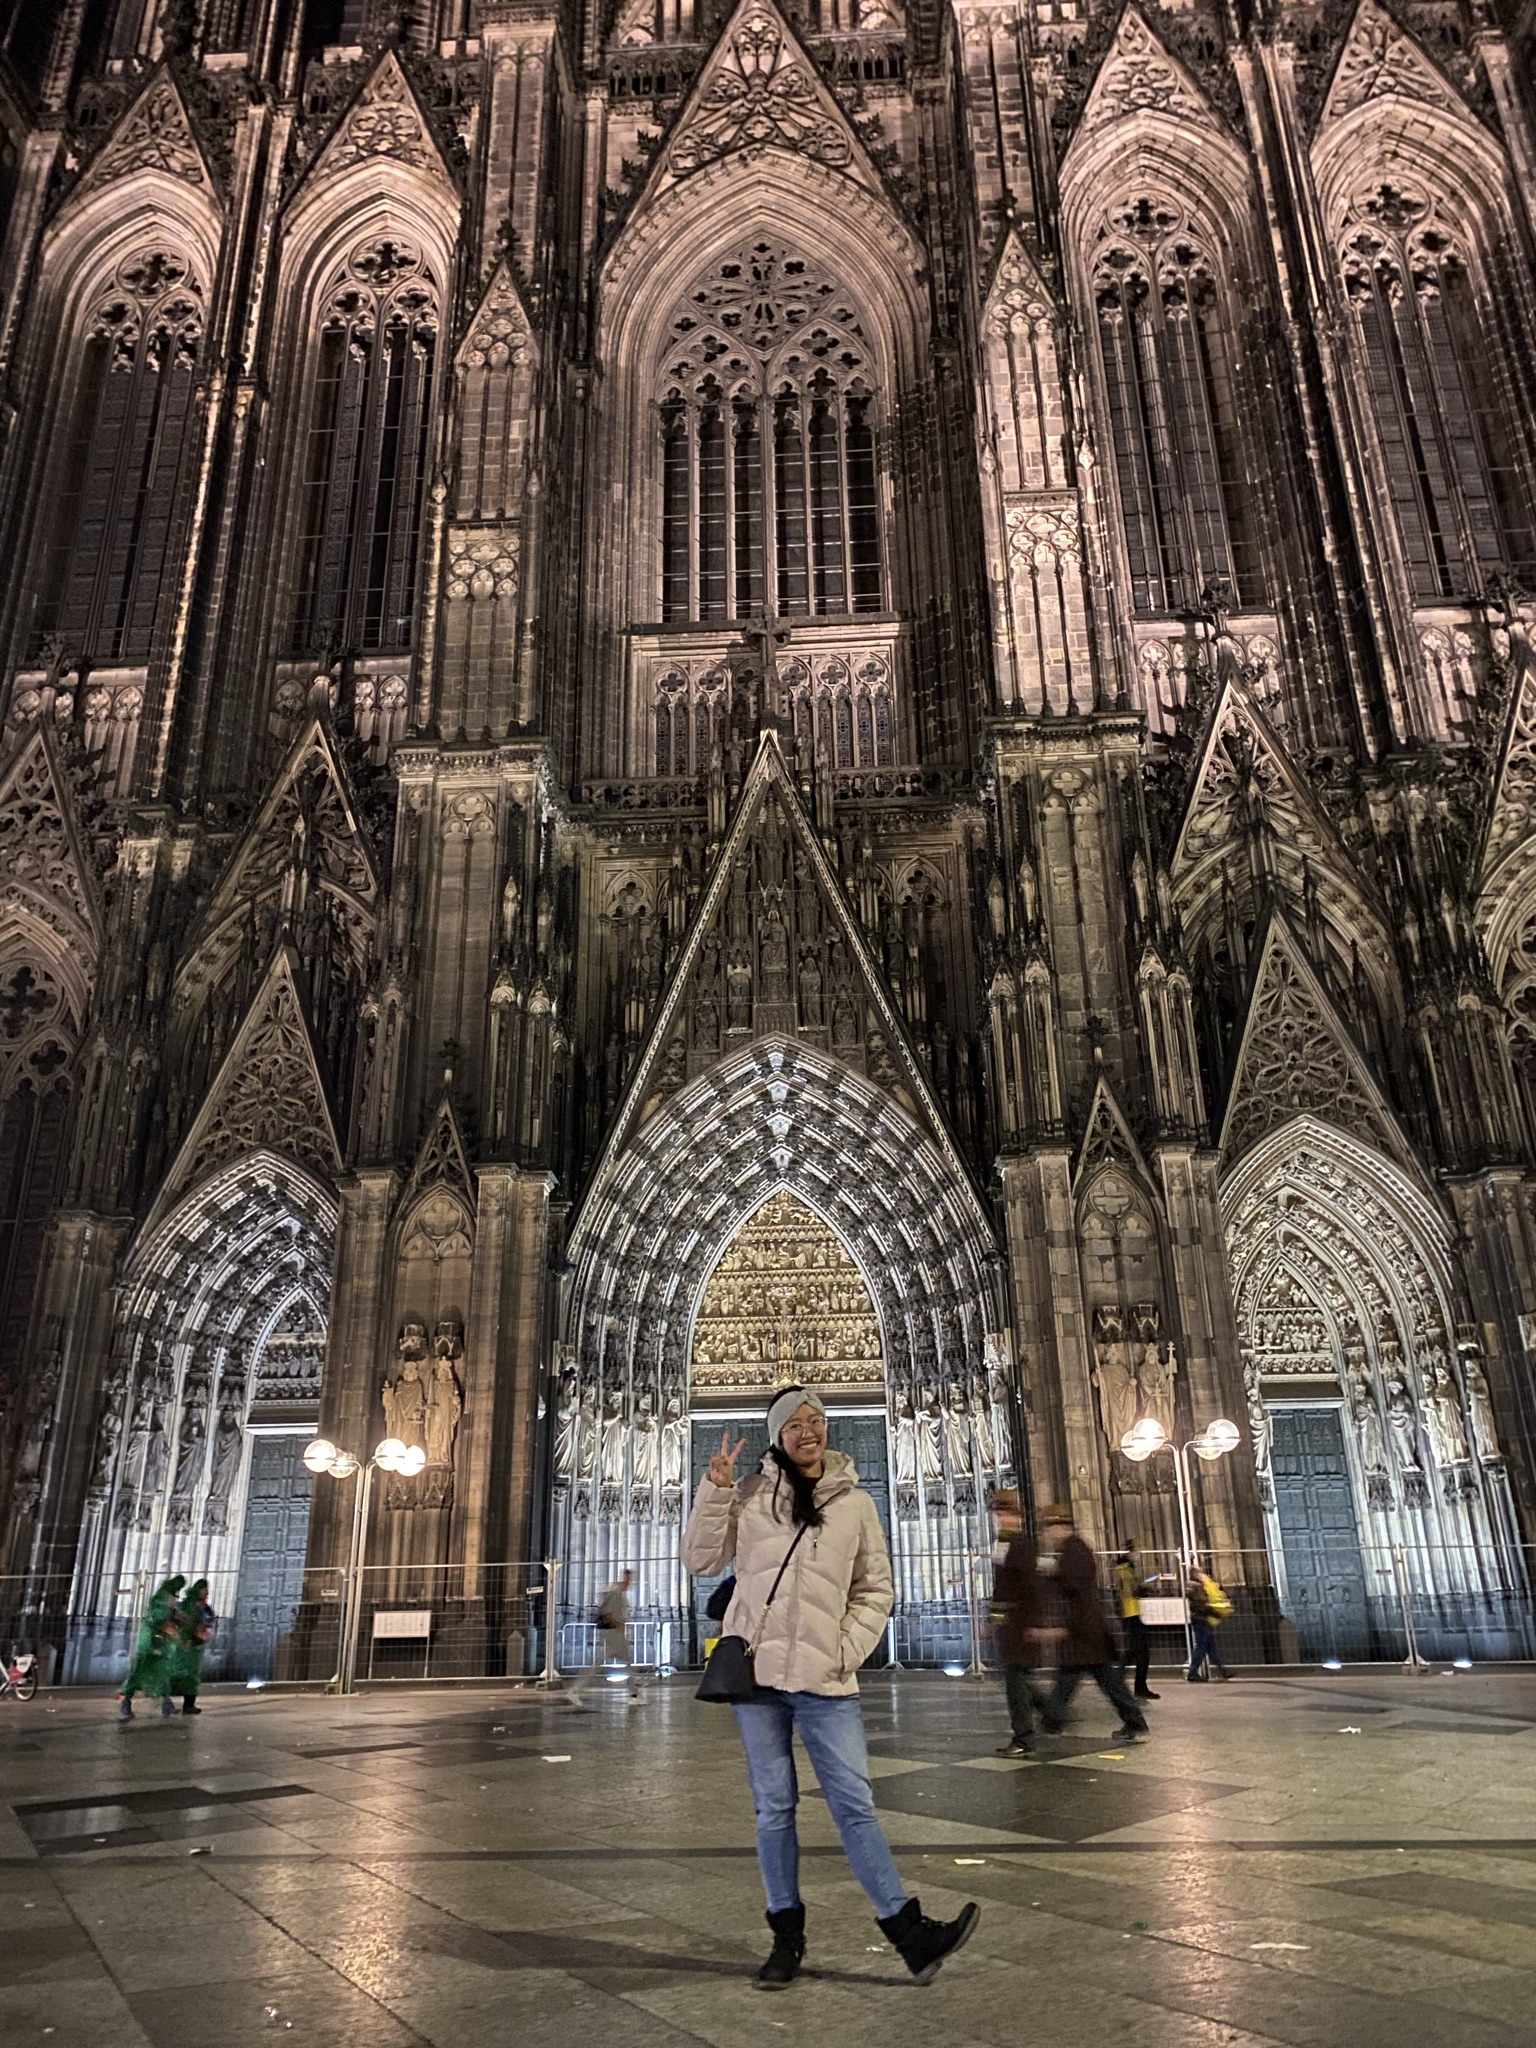 Monica Orillo visits Cologne Cathedral in North Rhine-Westphalia. The church's arching architecture extends so high in the background behind her that it stretches past the edges of the photo.